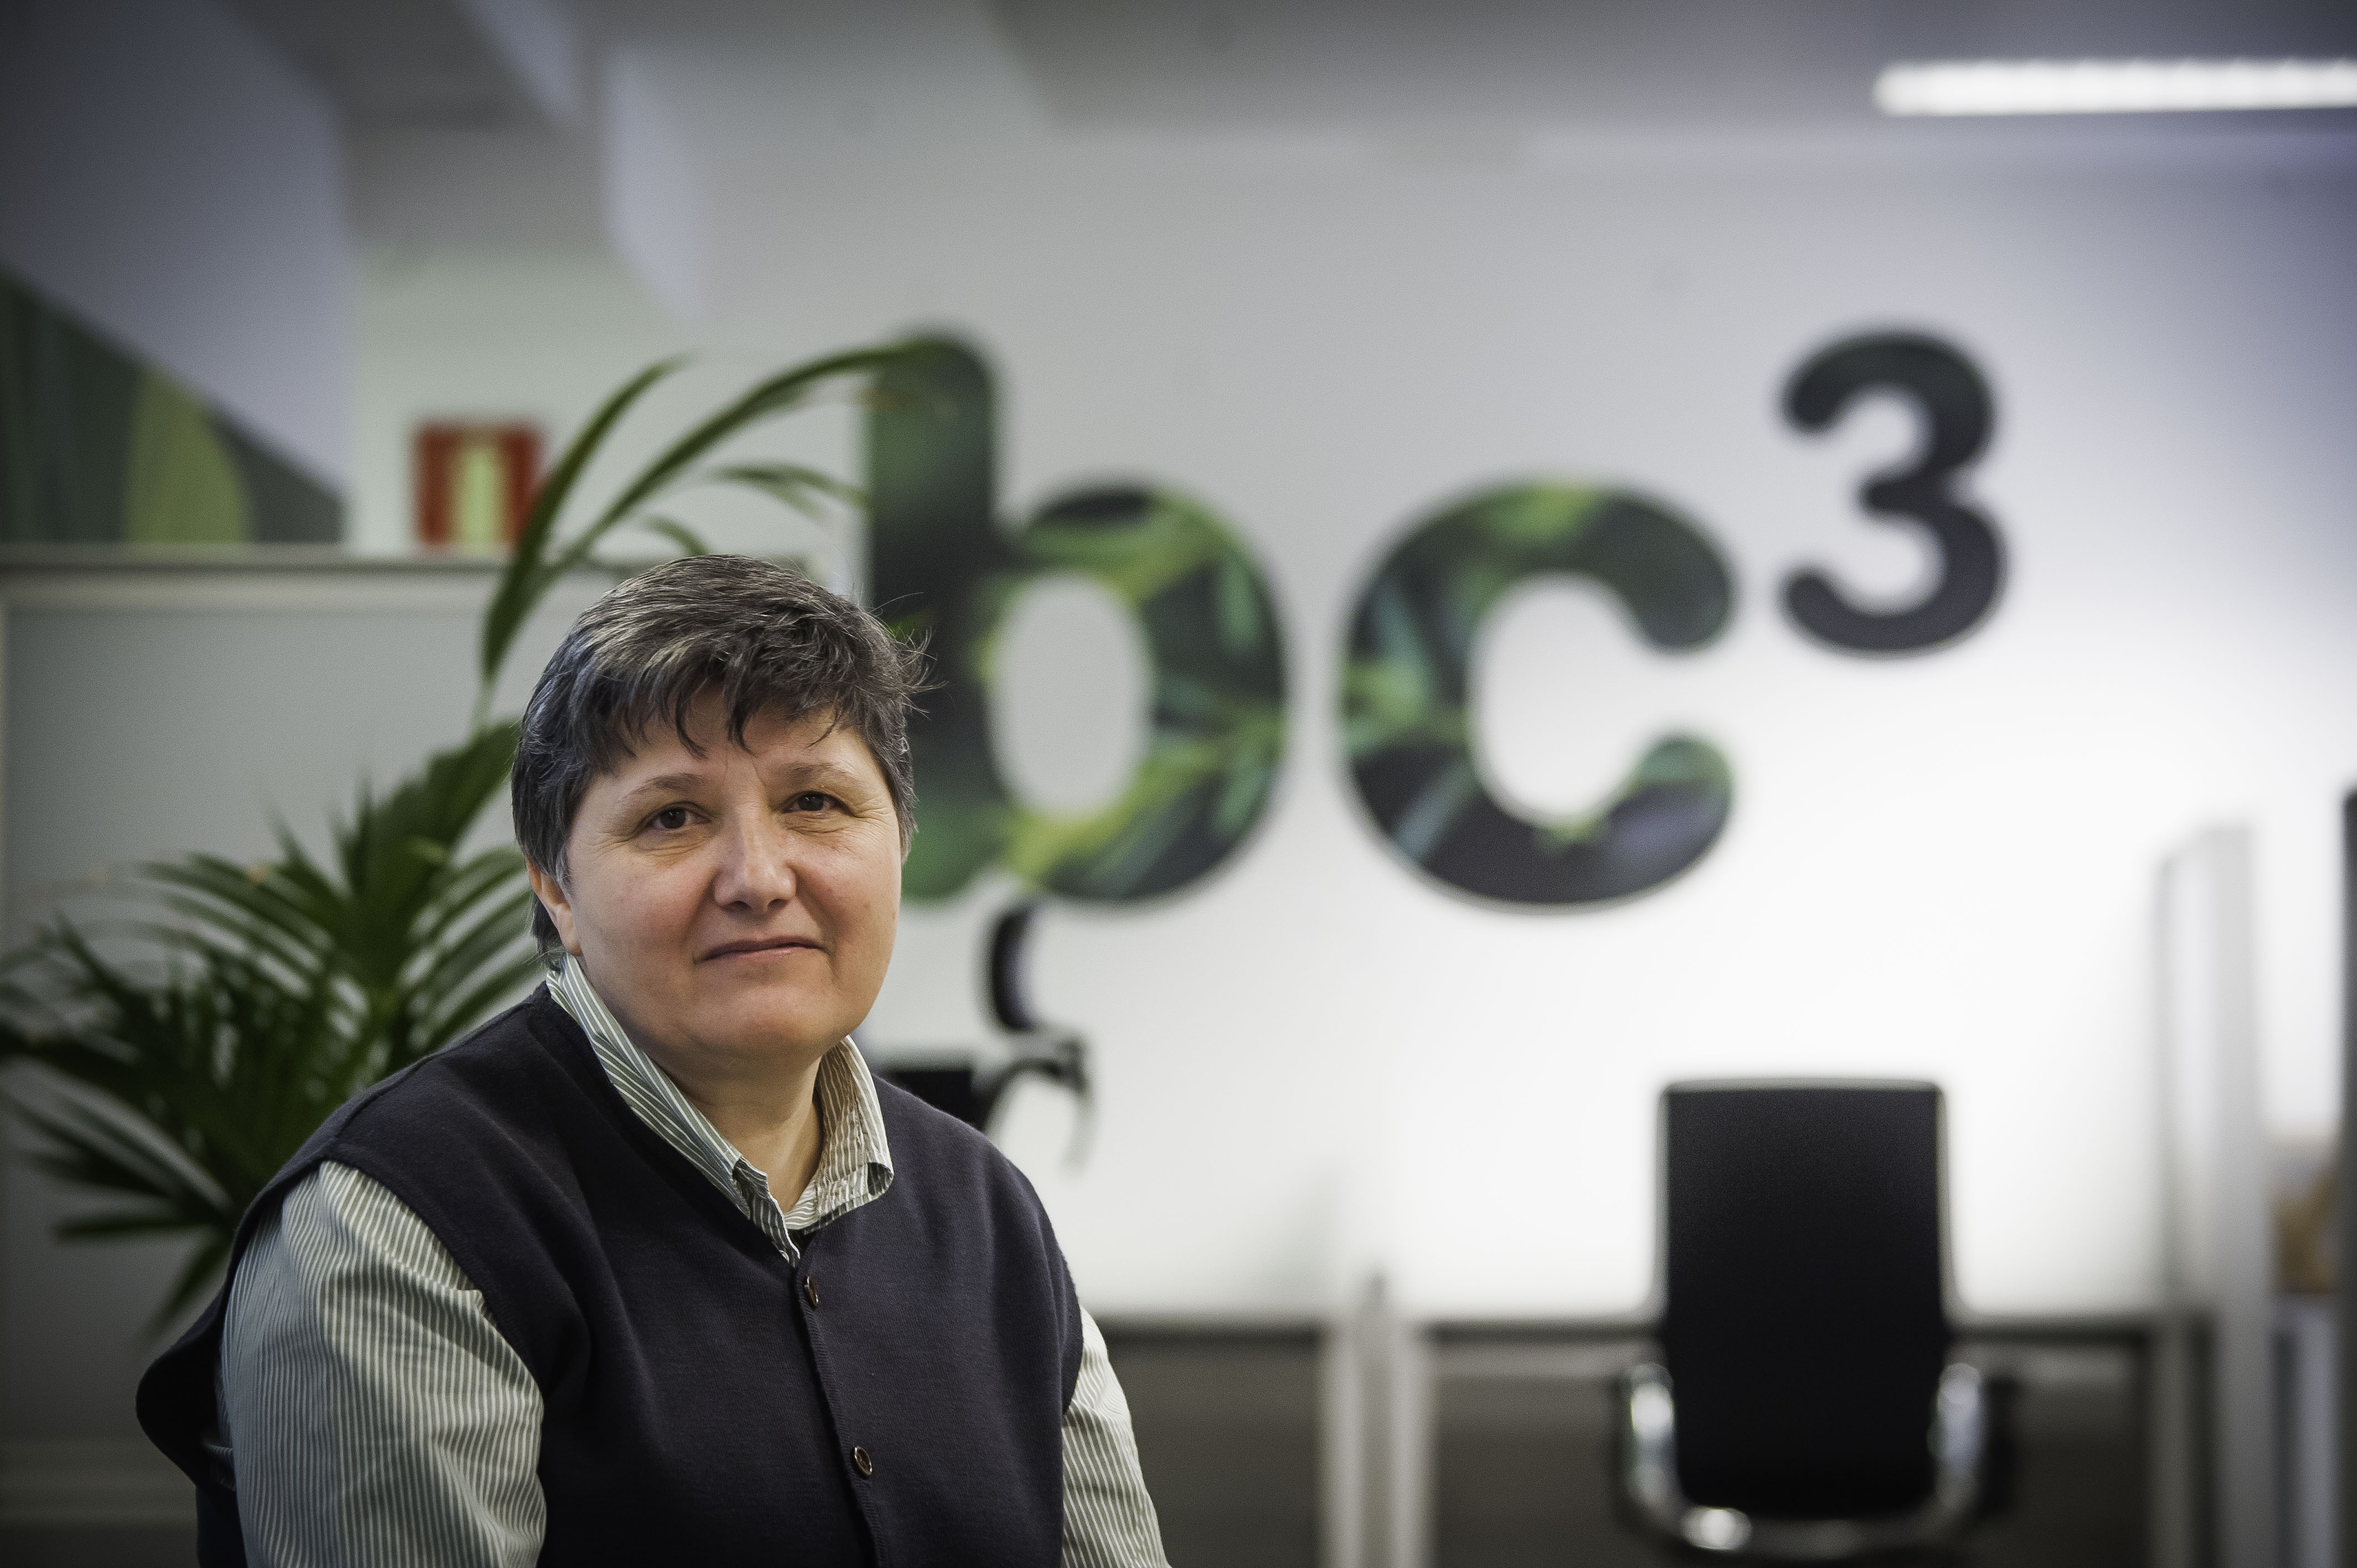 Maria Jose Sanz, Ikerbasque Research Professor and director of BC3 - Basque Center on Climate Change